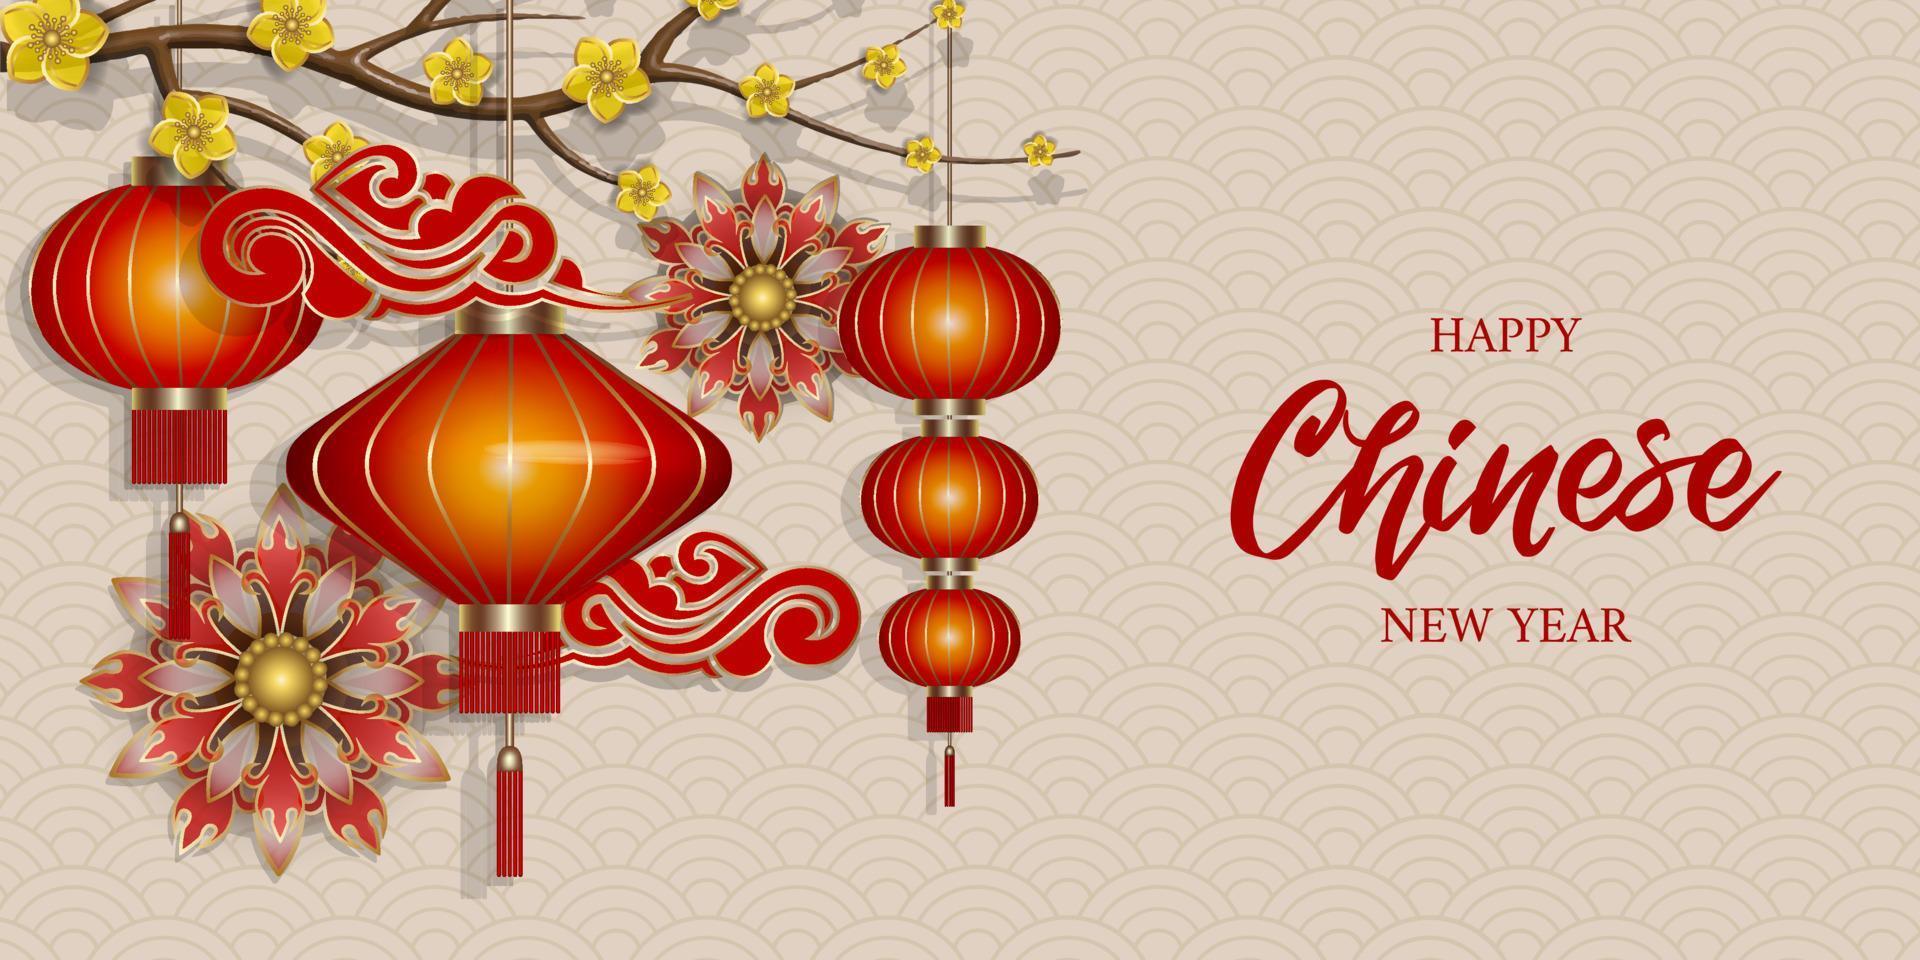 chinese new year banner with red lanterns, clouds and flowers vector